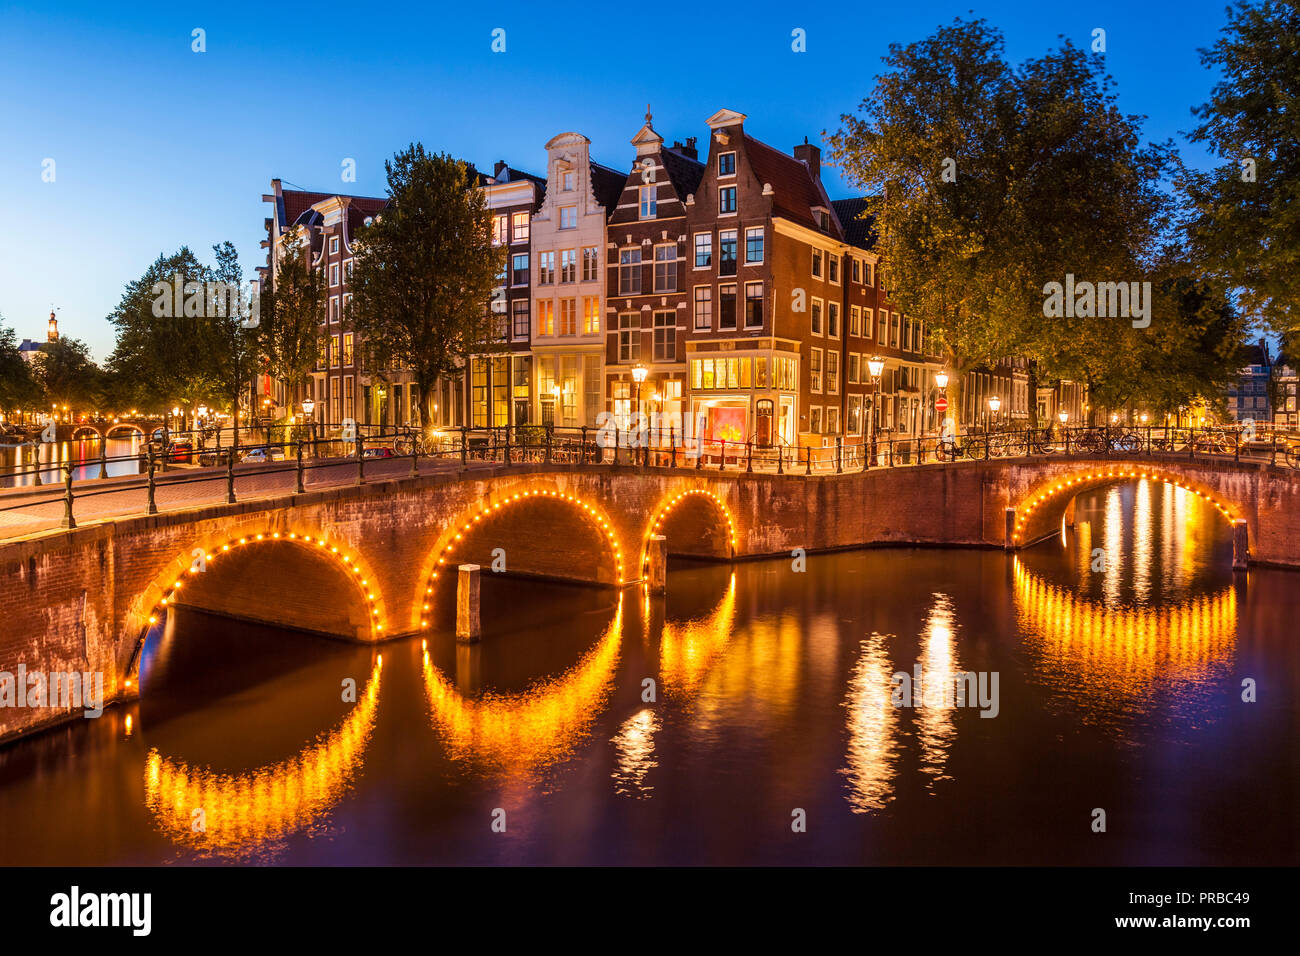 Amsterdam canal Illuminated bridges over the Keizersgracht canal and Leidsegracht canal Amsterdam canals Holland the Netherlands EU Europe Stock Photo